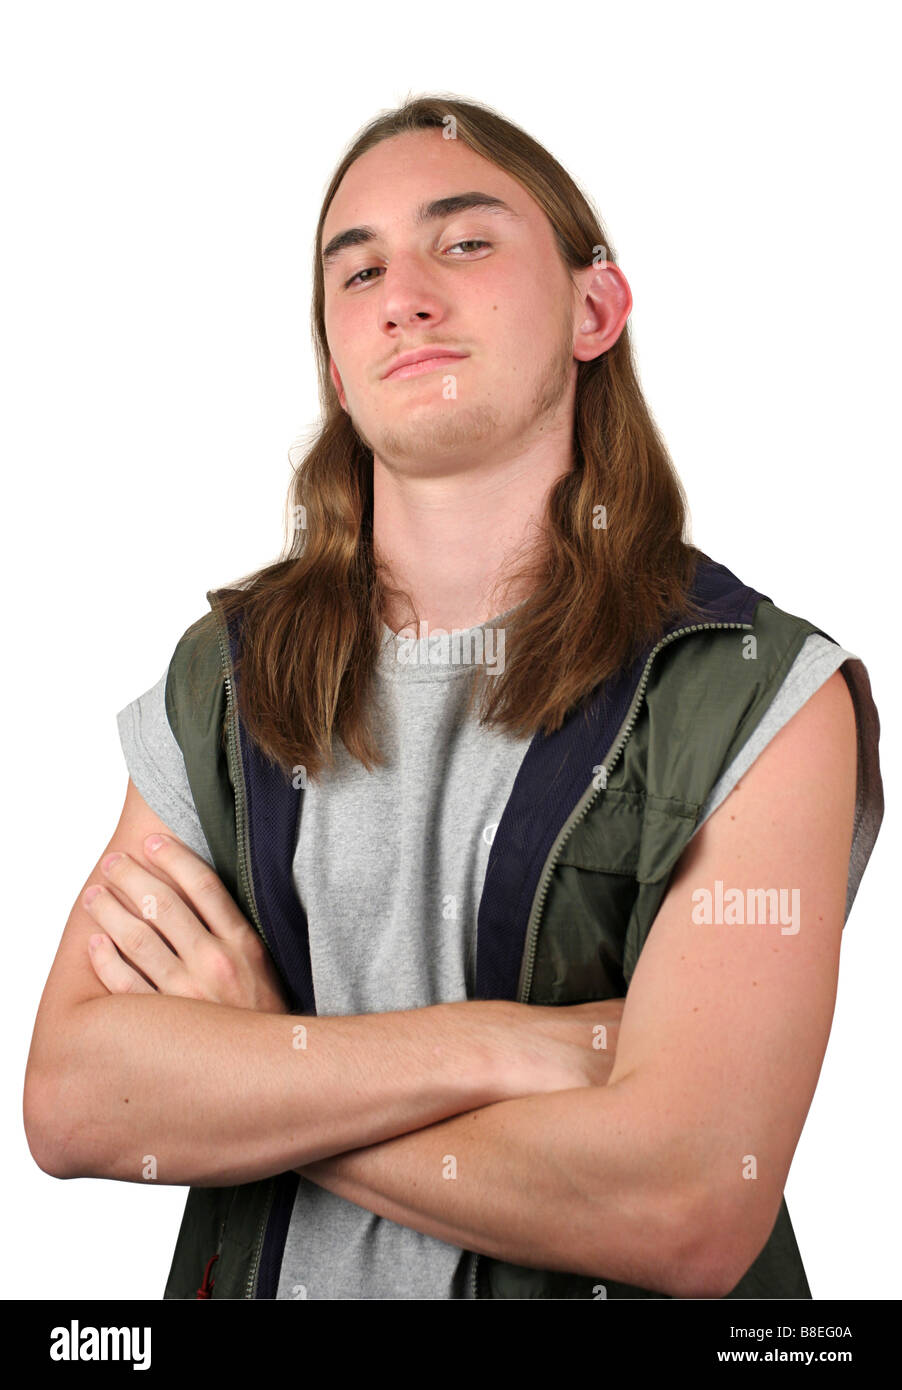 a belligerent teenaged boy with an attitude problem Stock Photo